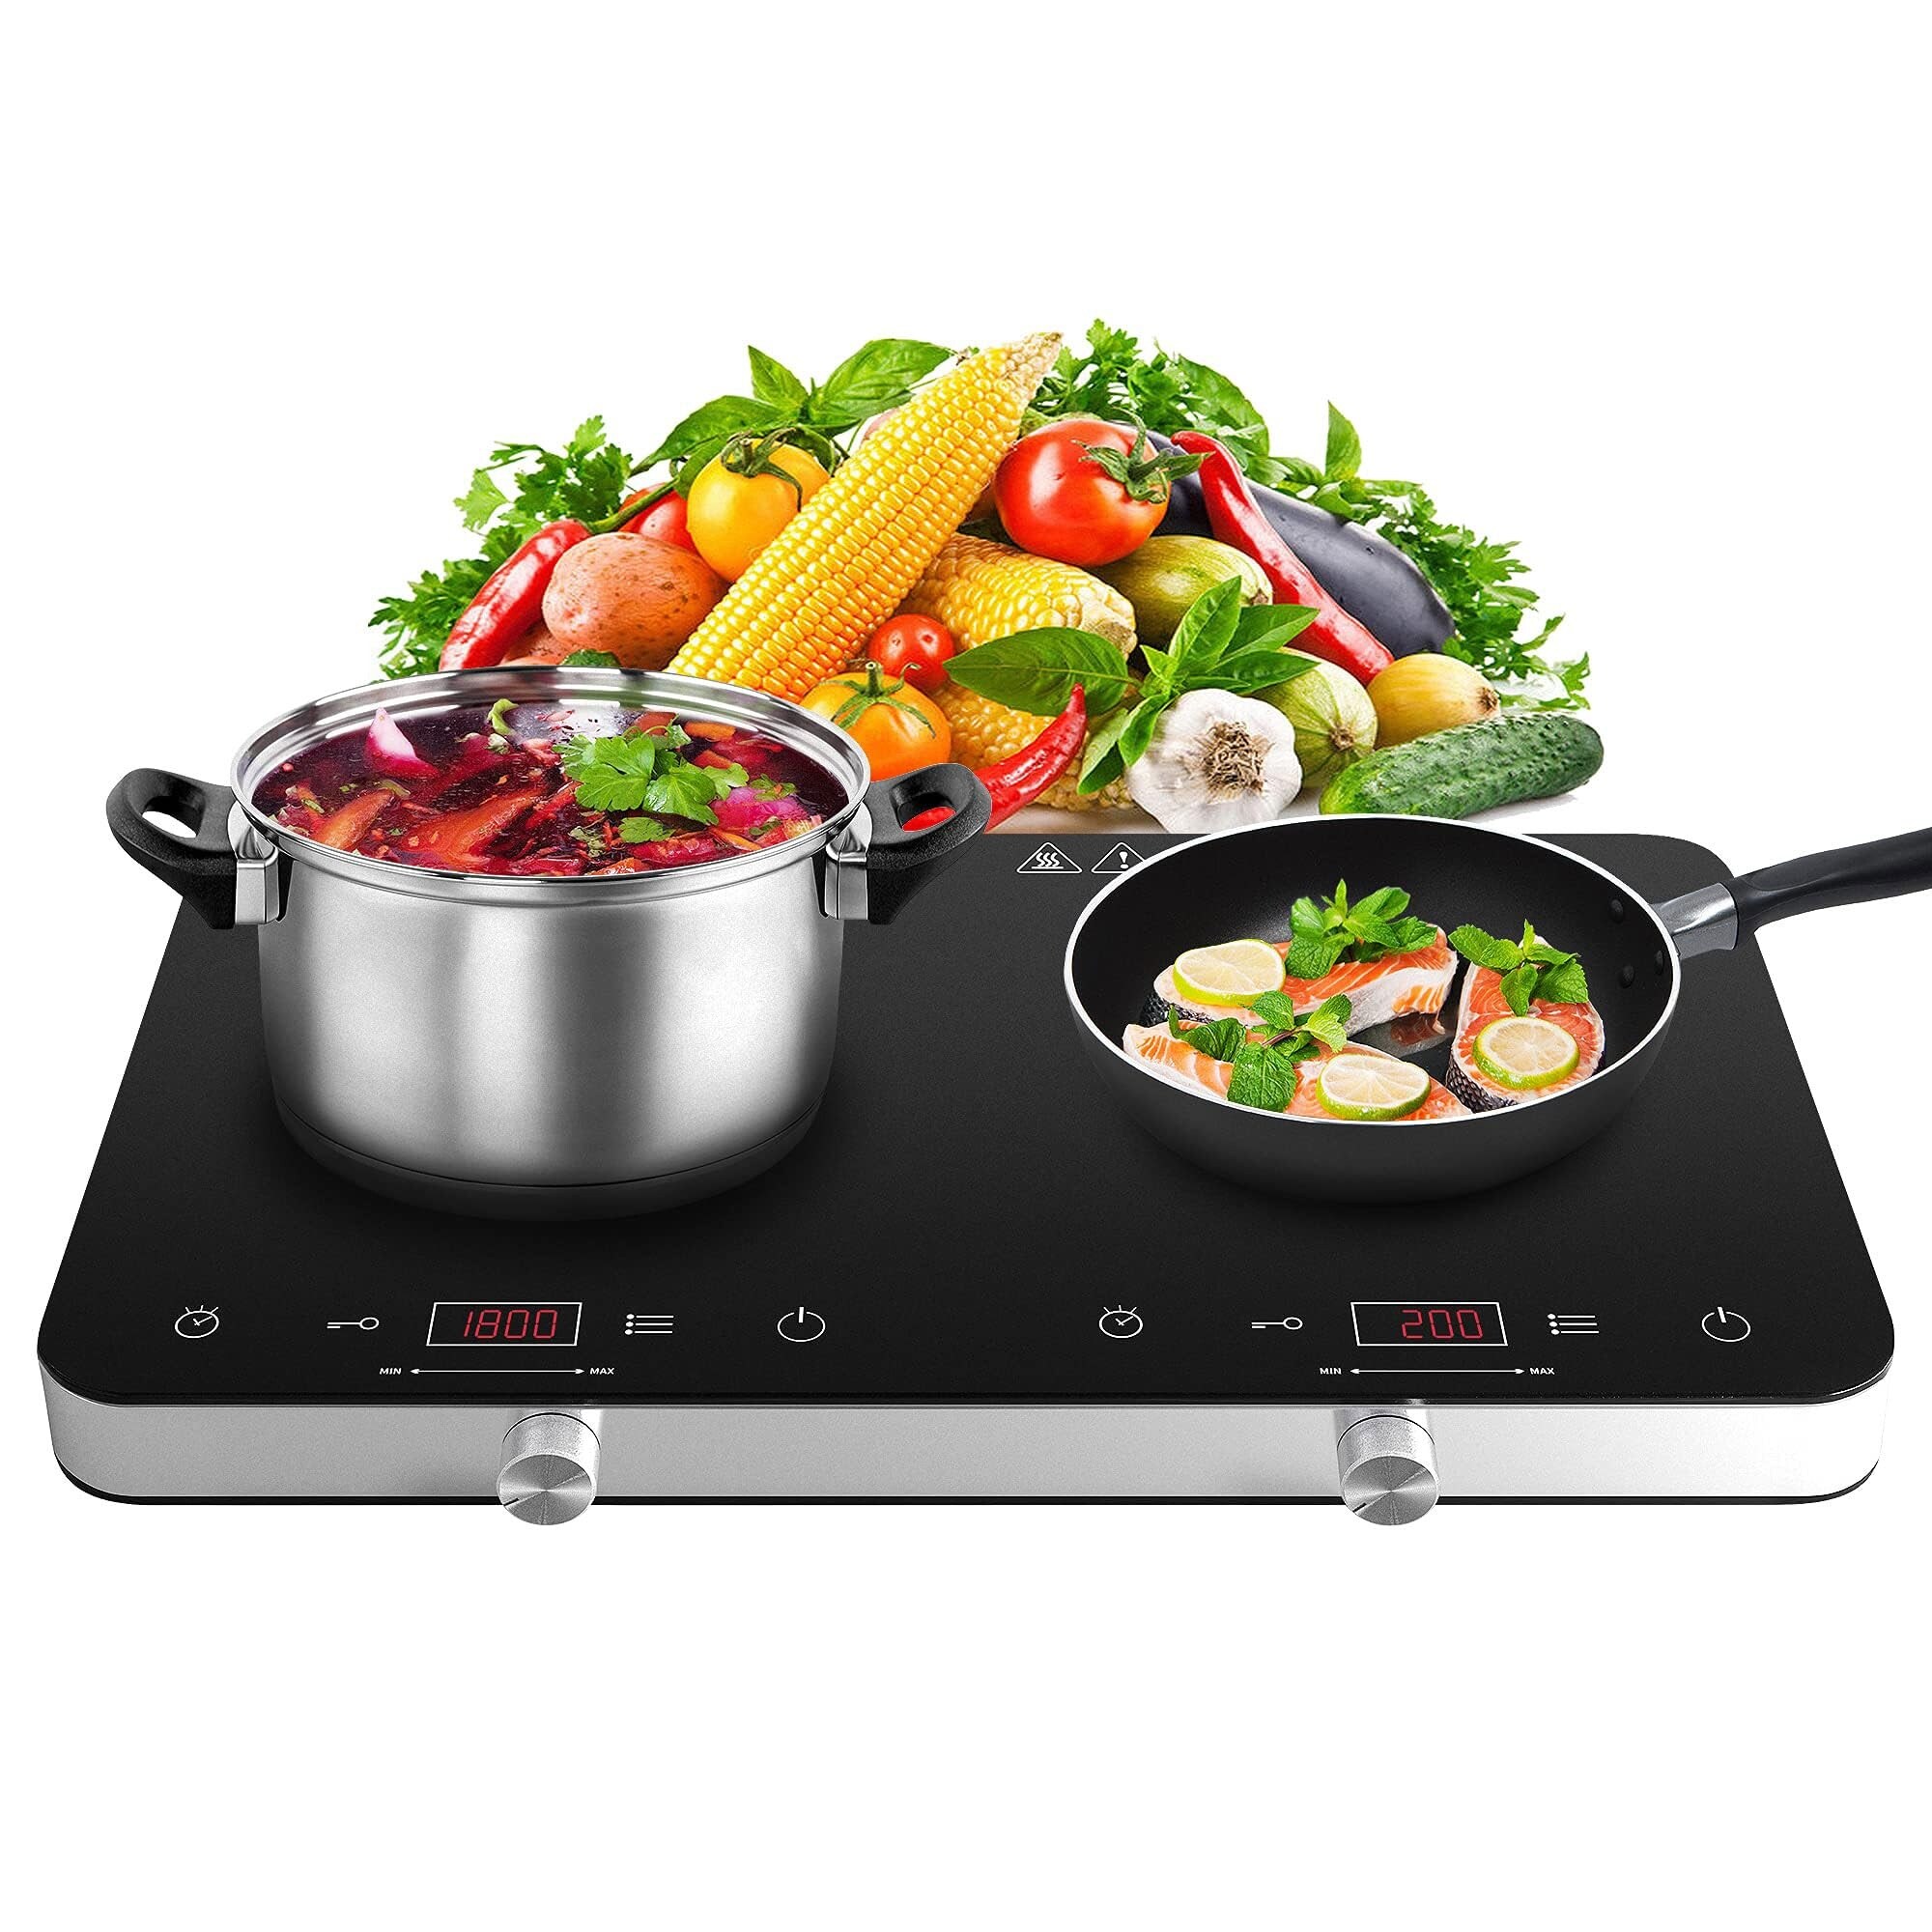 Multi-function 1800W Portable Induction Cooker Cooktop Burner Black by Classic Cuisine